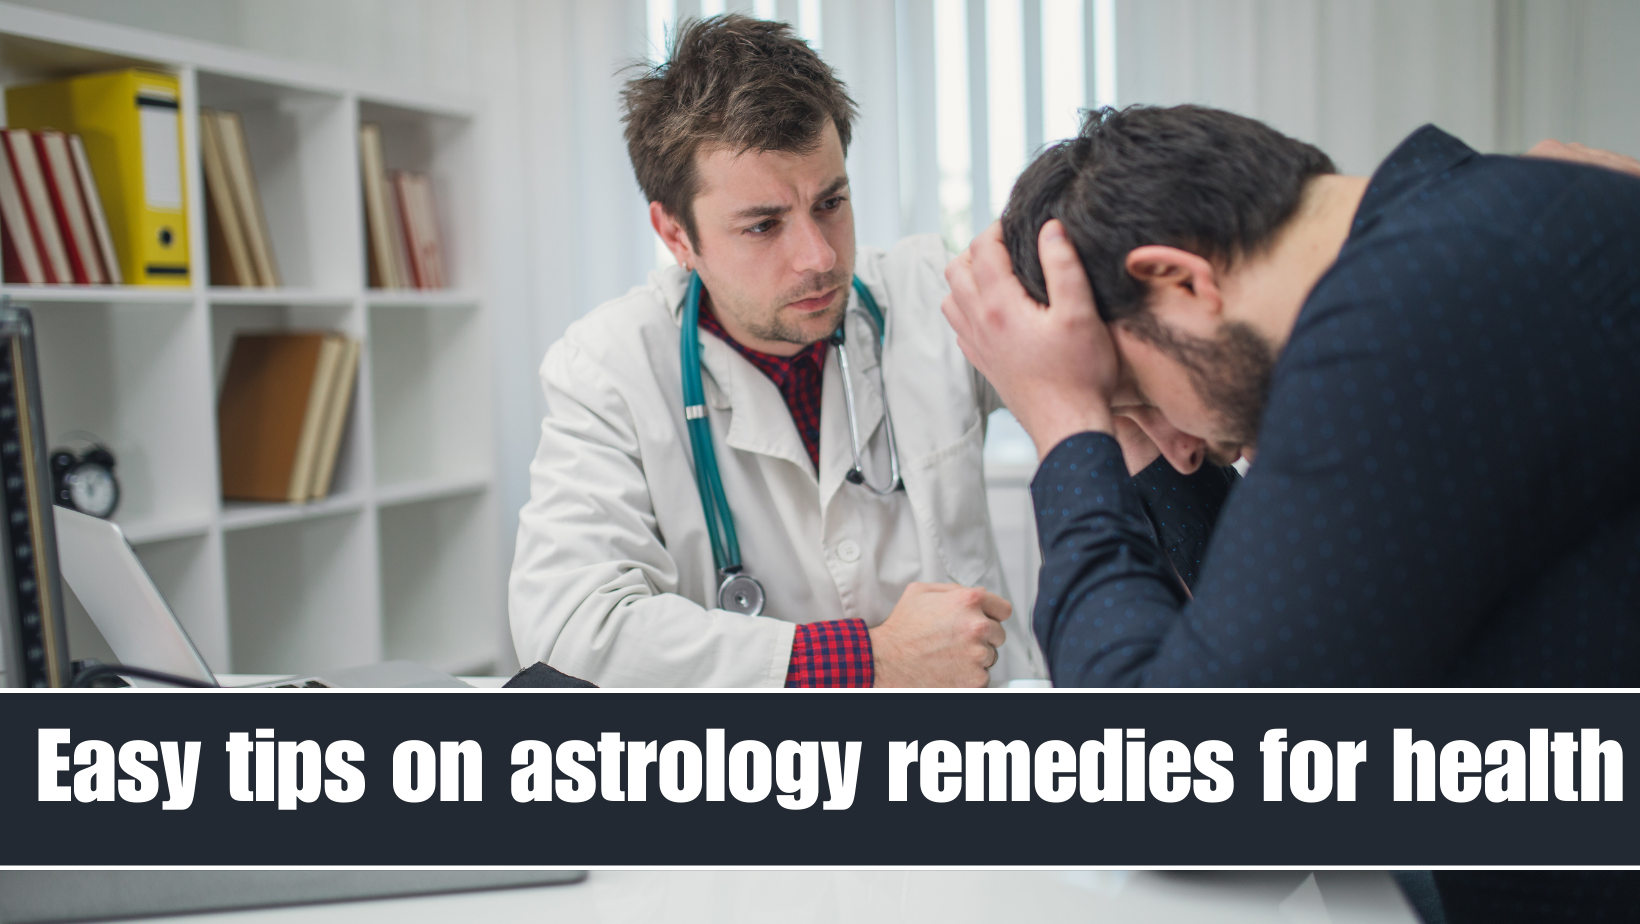 Easy tips on astrology remedies for health